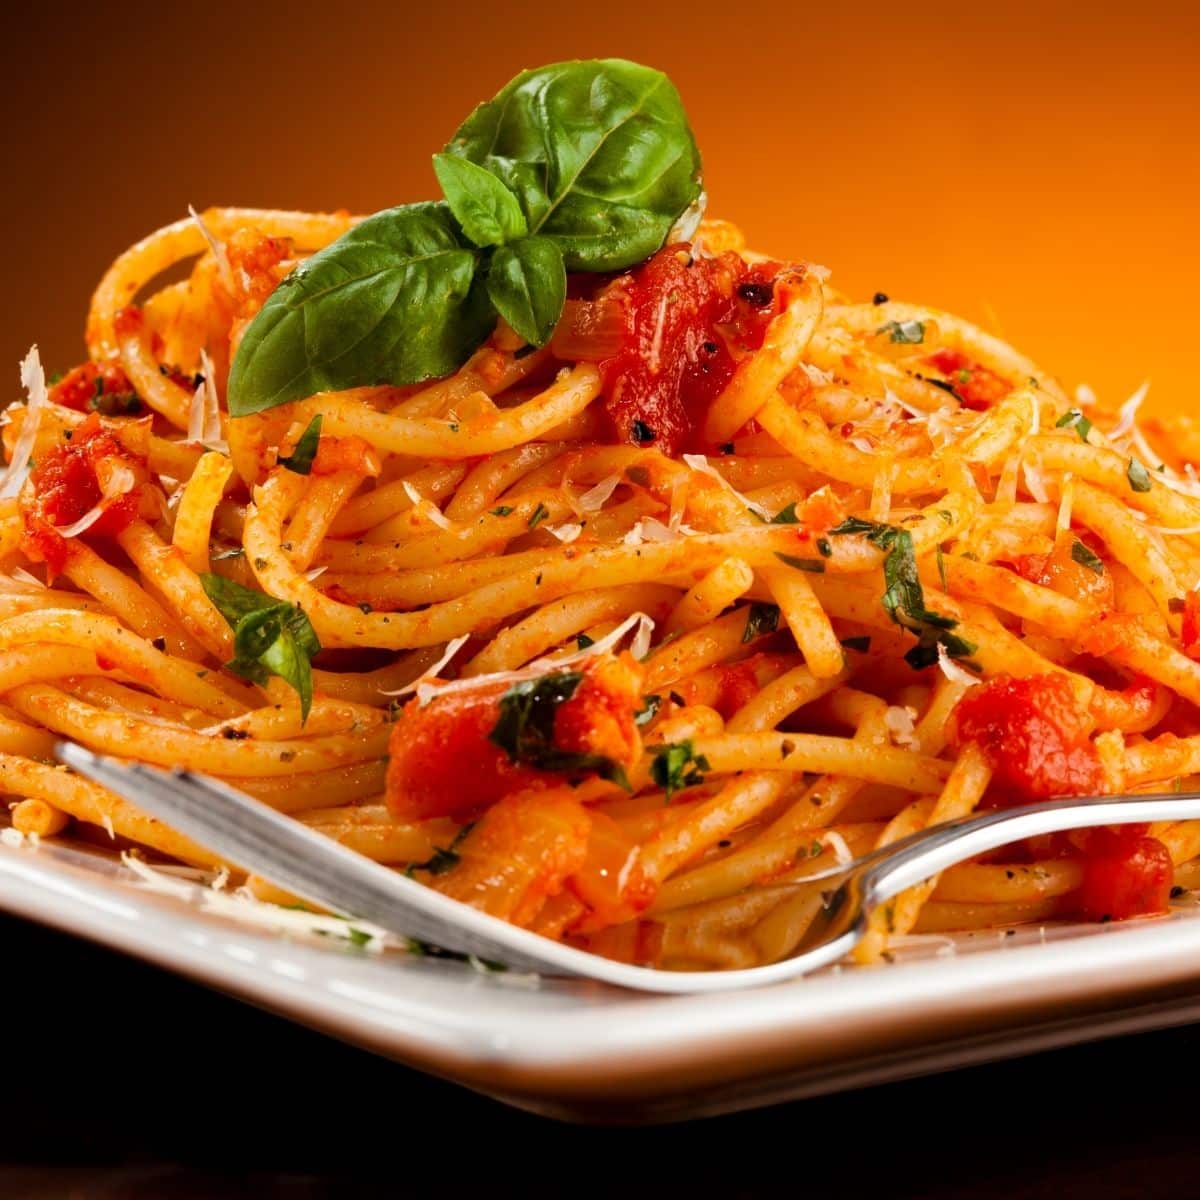 plate of spaghetti with red tomato sauce and basil garnish.